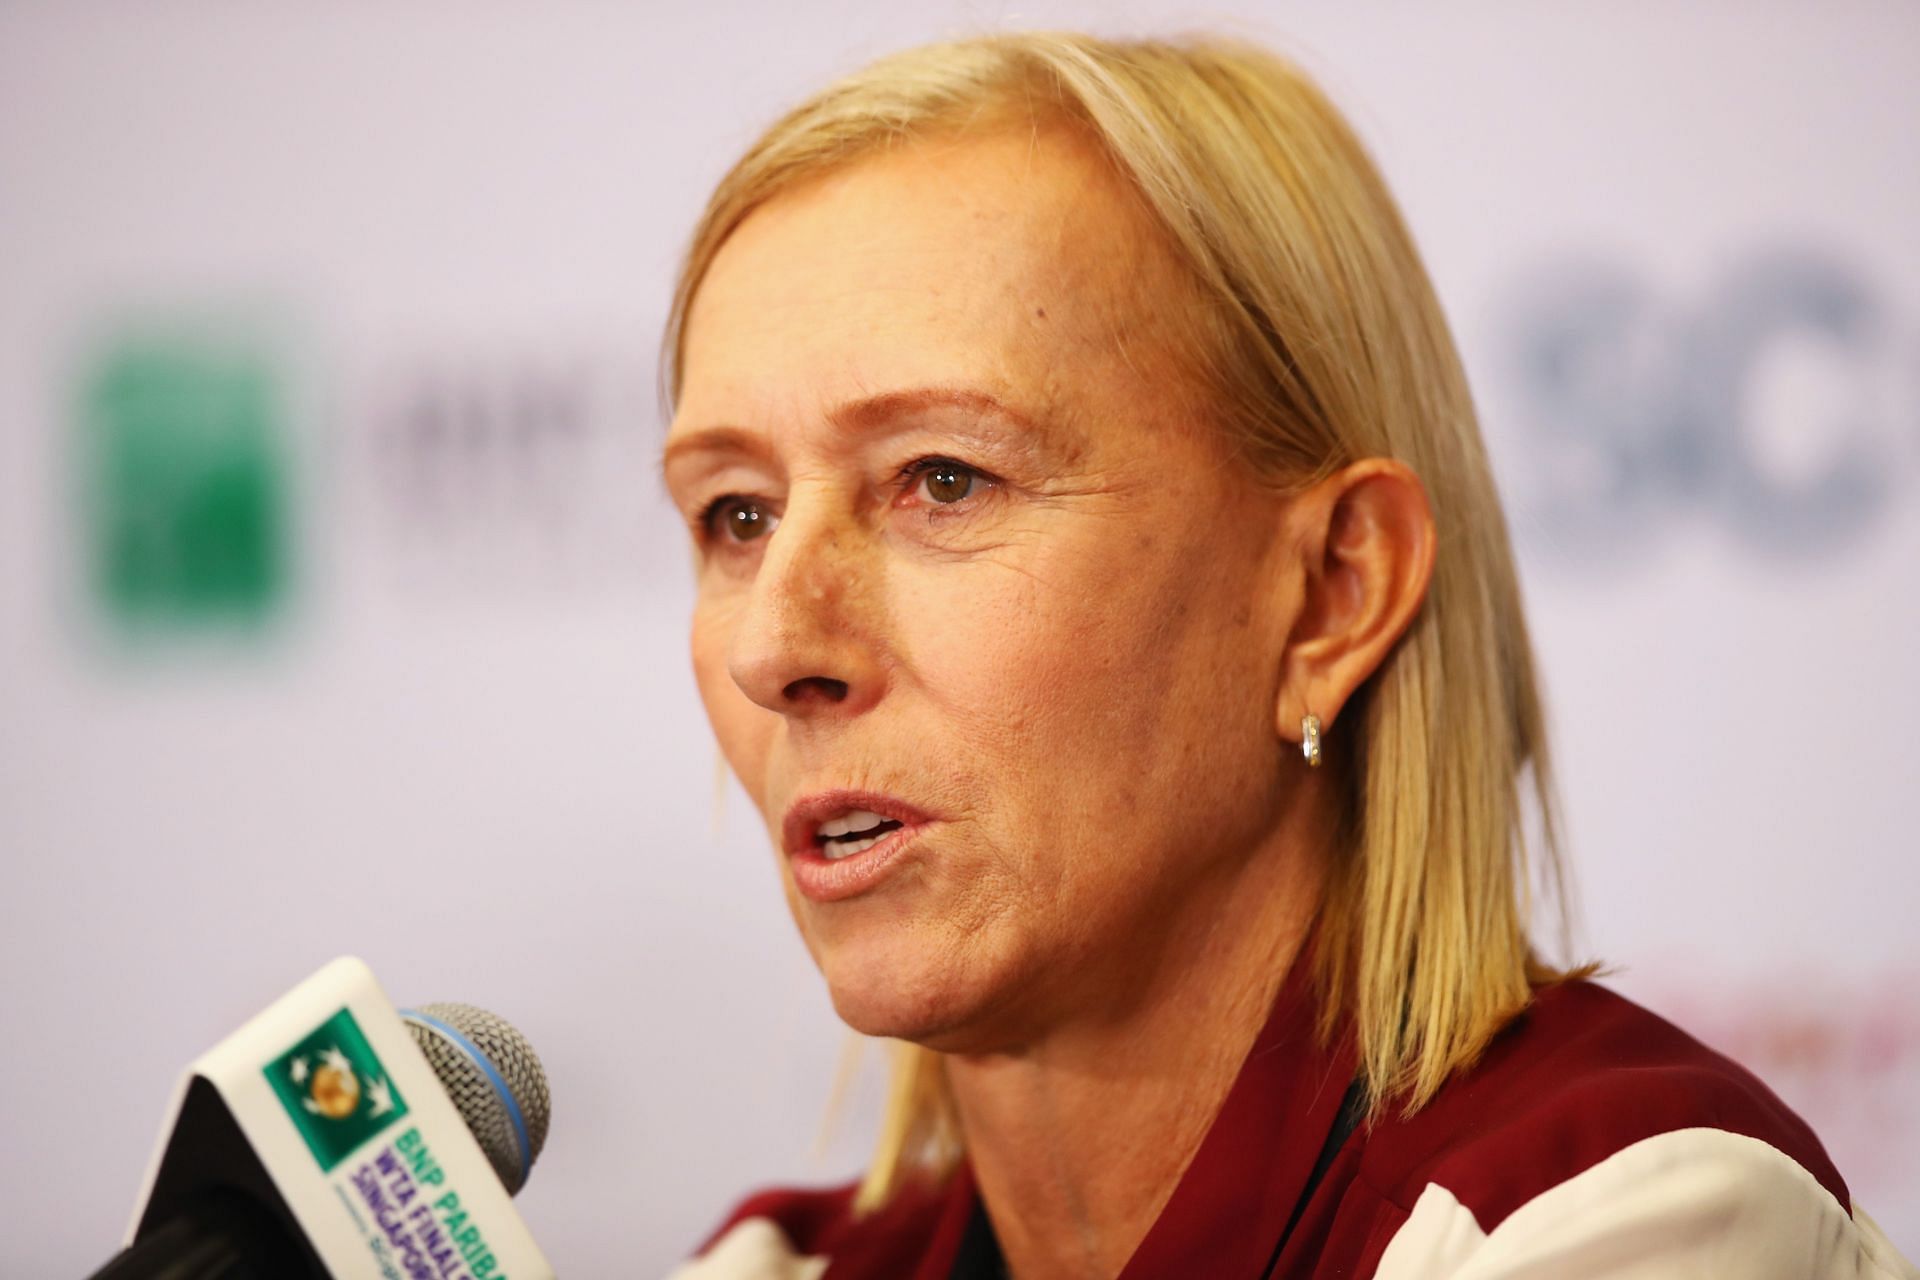 Martina Navratilova admitted to crying after finding out she had two cancers at the same time